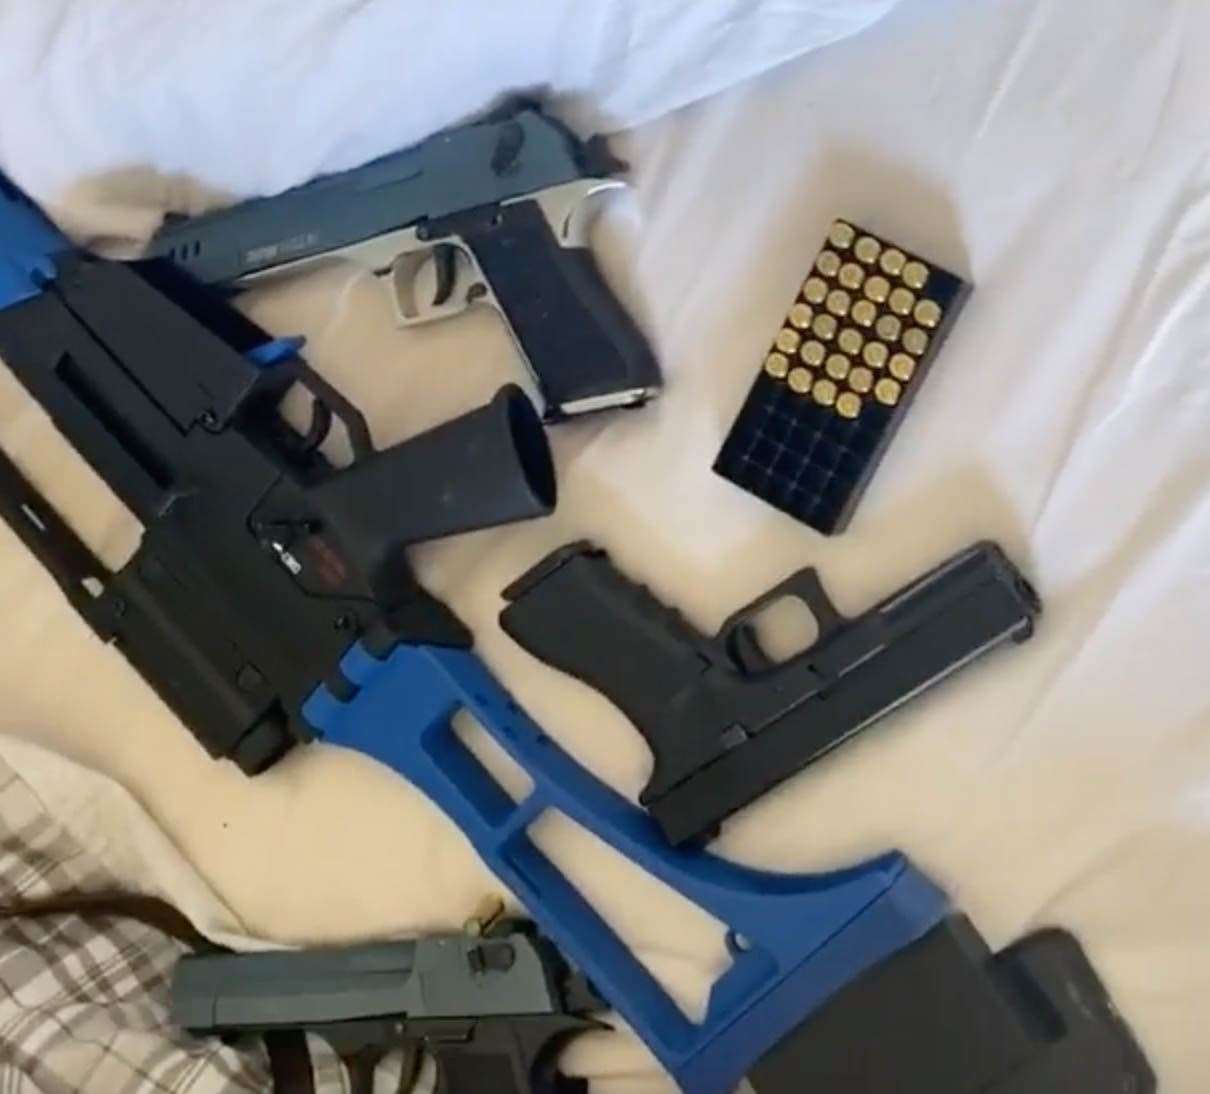 The gunman posted video of himself listening to loud music and showing off various weapons on social media before the police arrived.